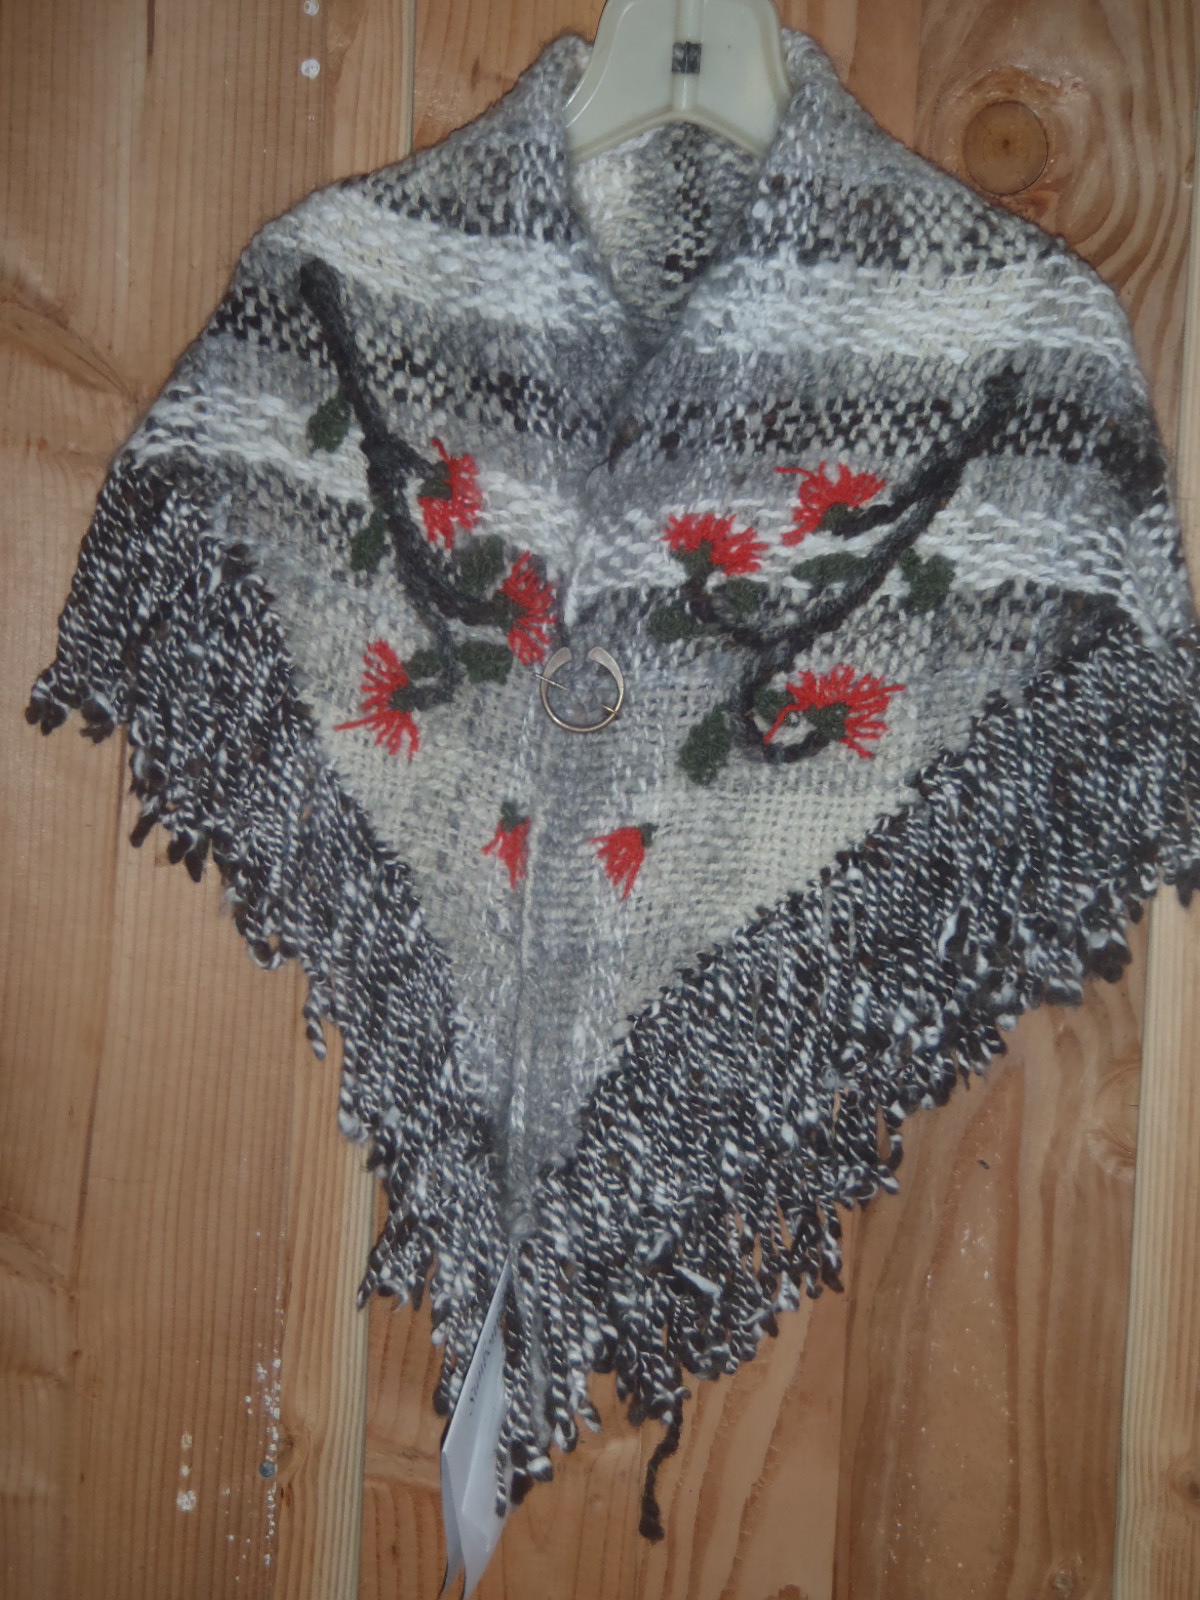 Shawl with embroider ohia blossoms.